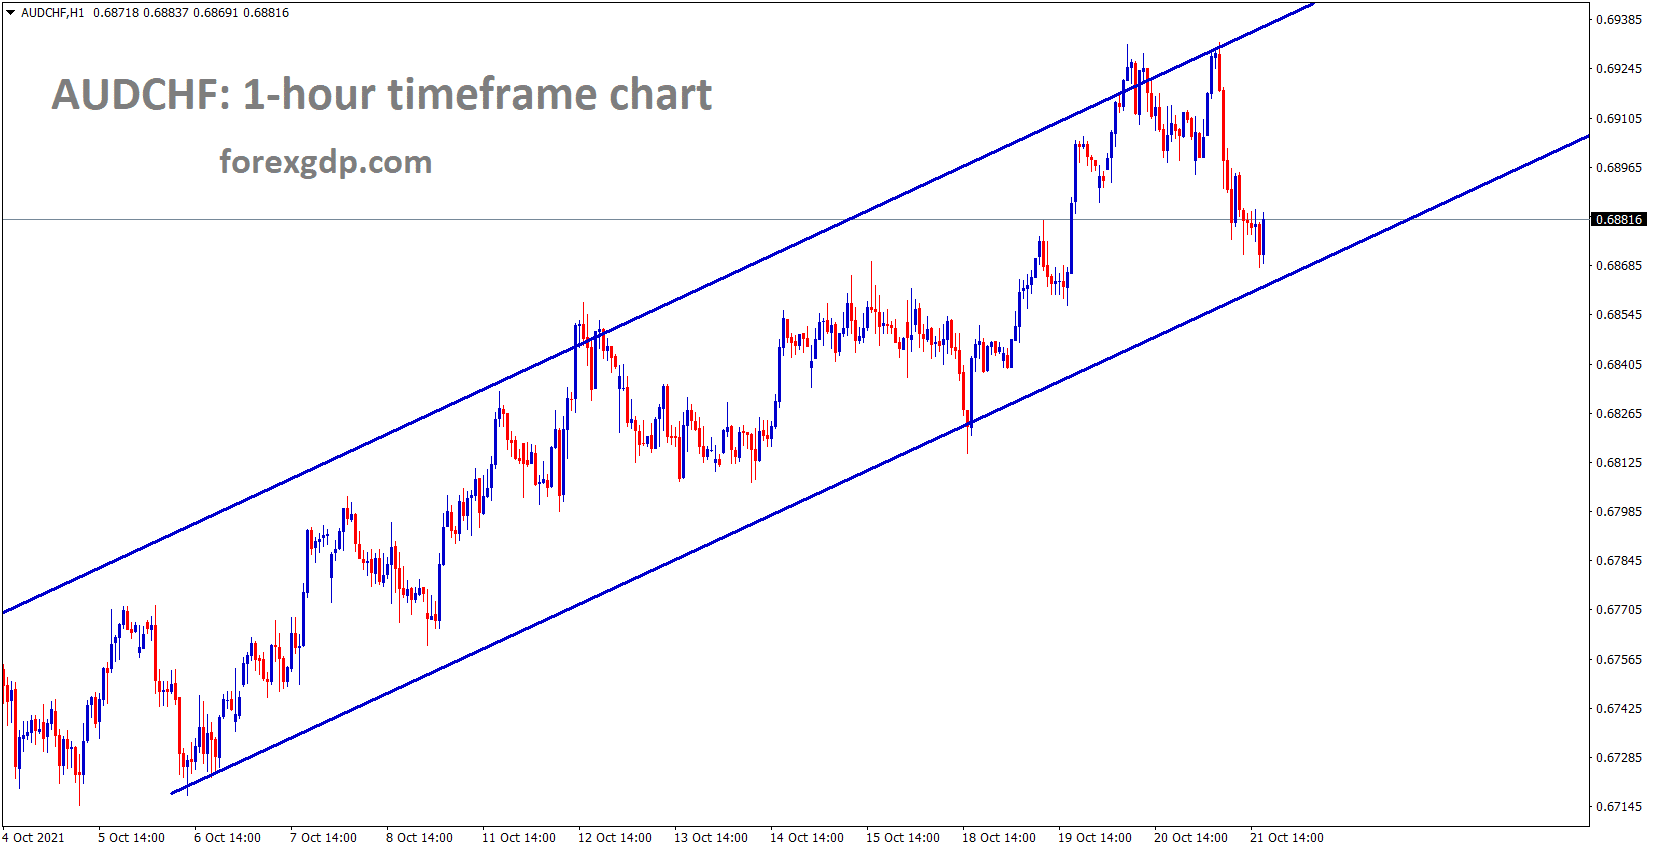 AUDCHF is moving in an Ascending channel now price hits the higher low area of the channel line